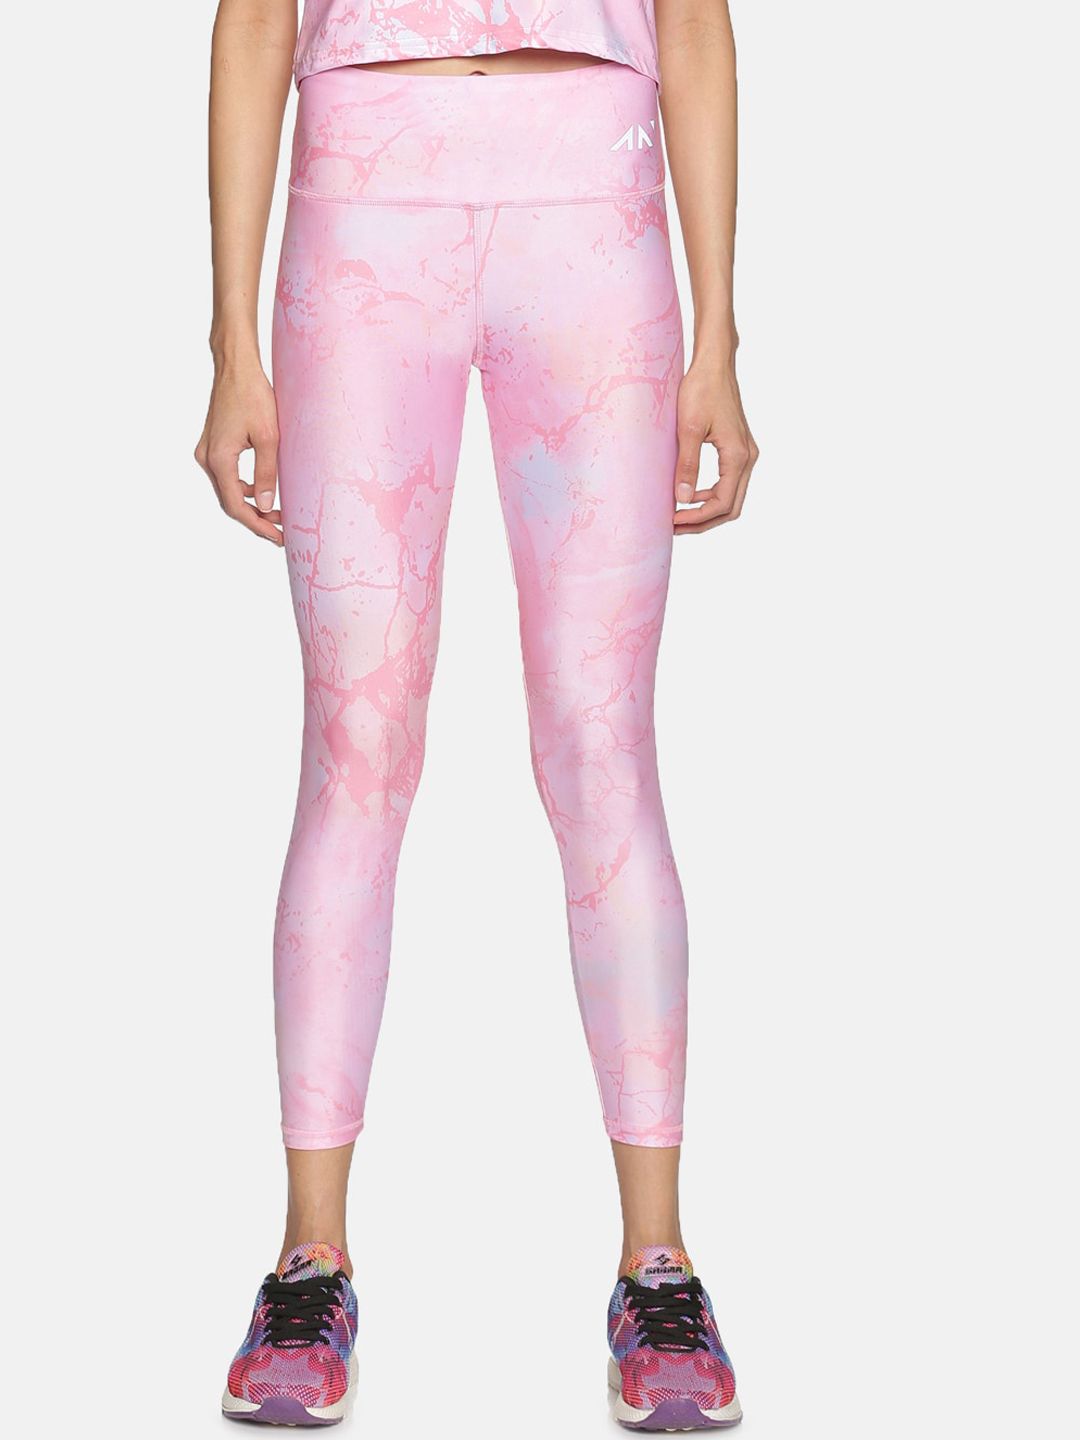 AESTHETIC NATION Women Pink Contour Tie Dye Tights Price in India